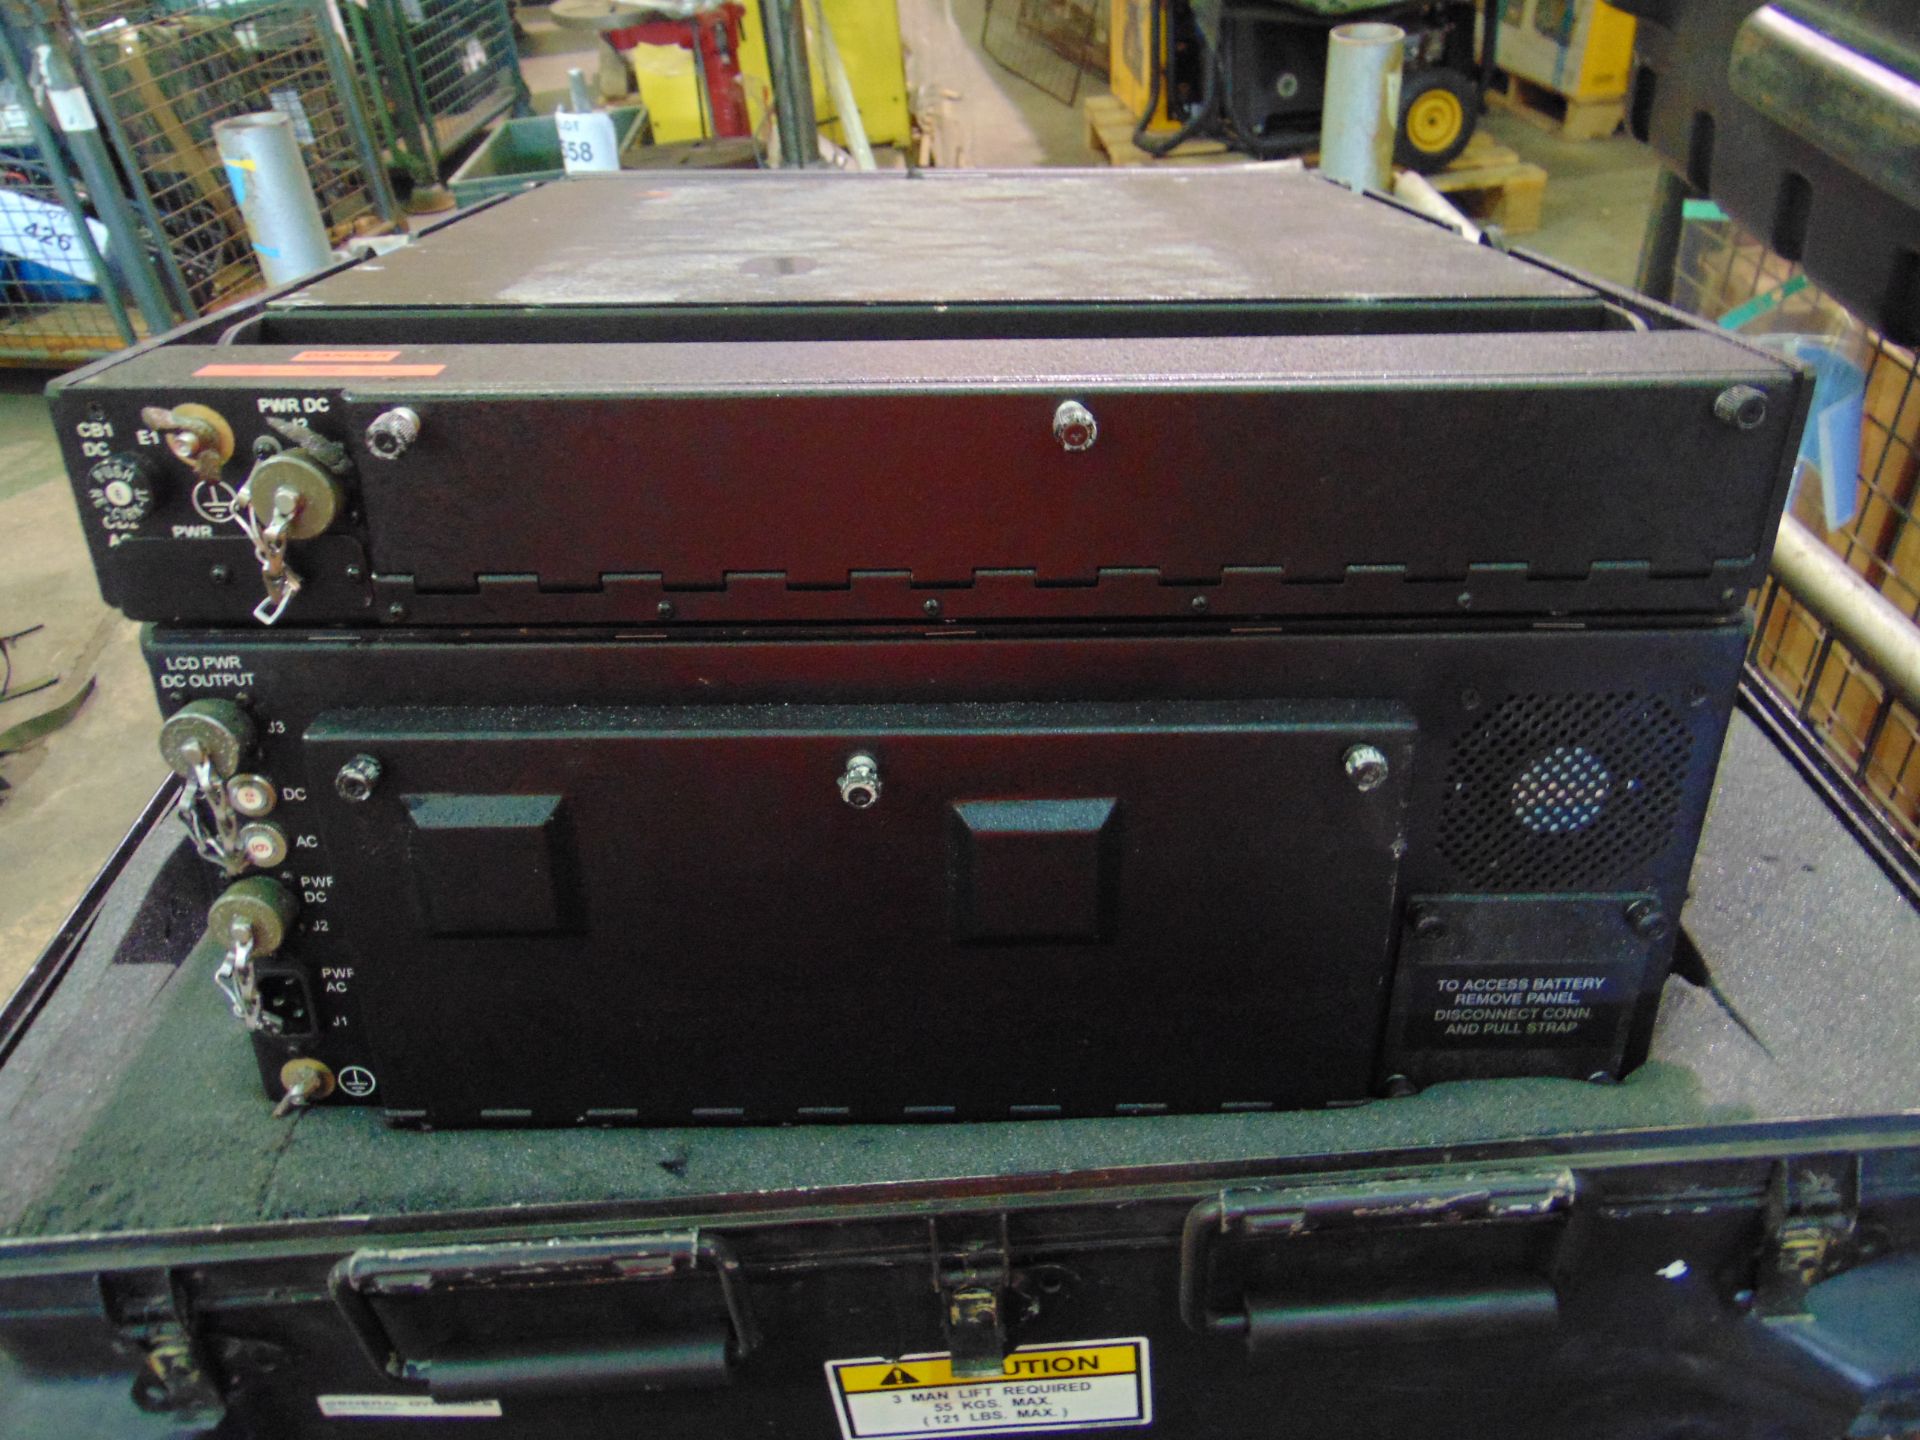 General Dynamic Military Ruggedized Portable Computer w/ Protective Transport Case - Image 10 of 14